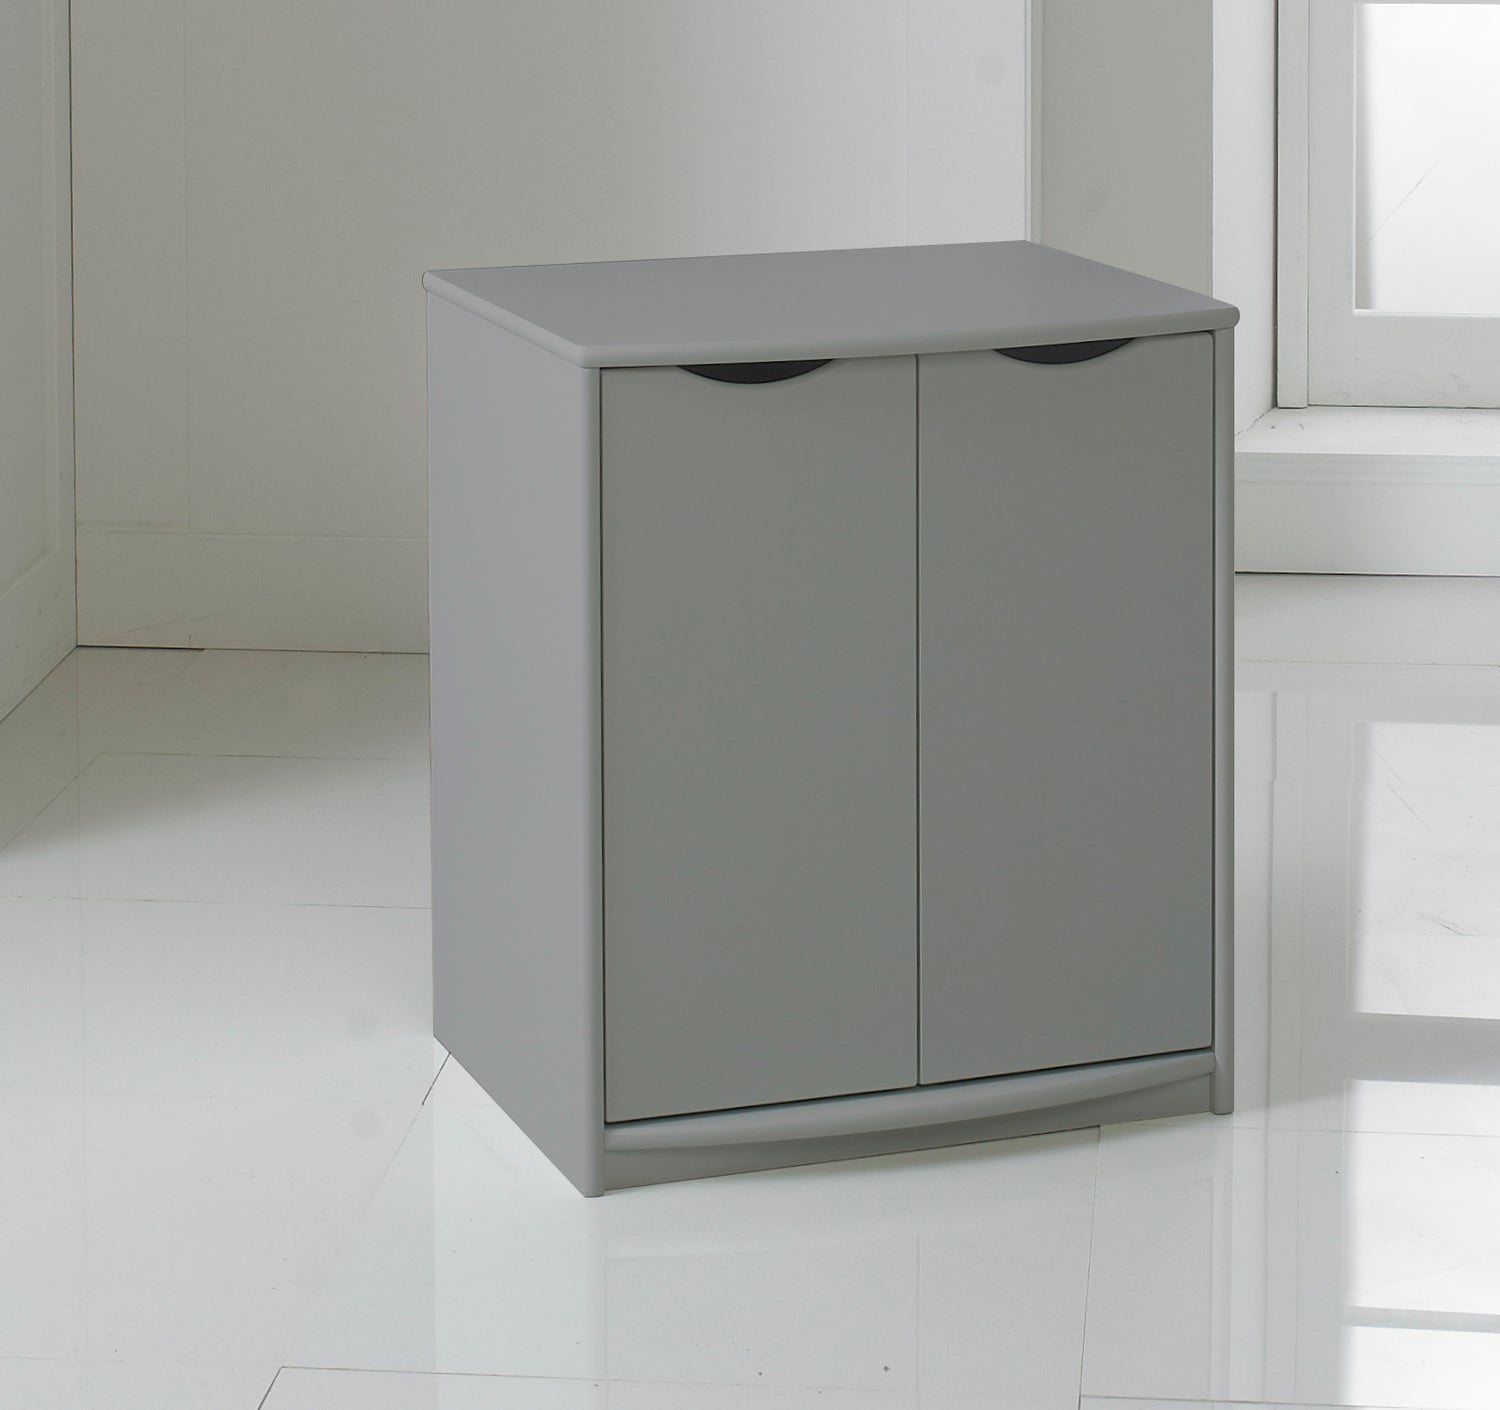 Scallywag Medium Cupboard Unit (also available in white)